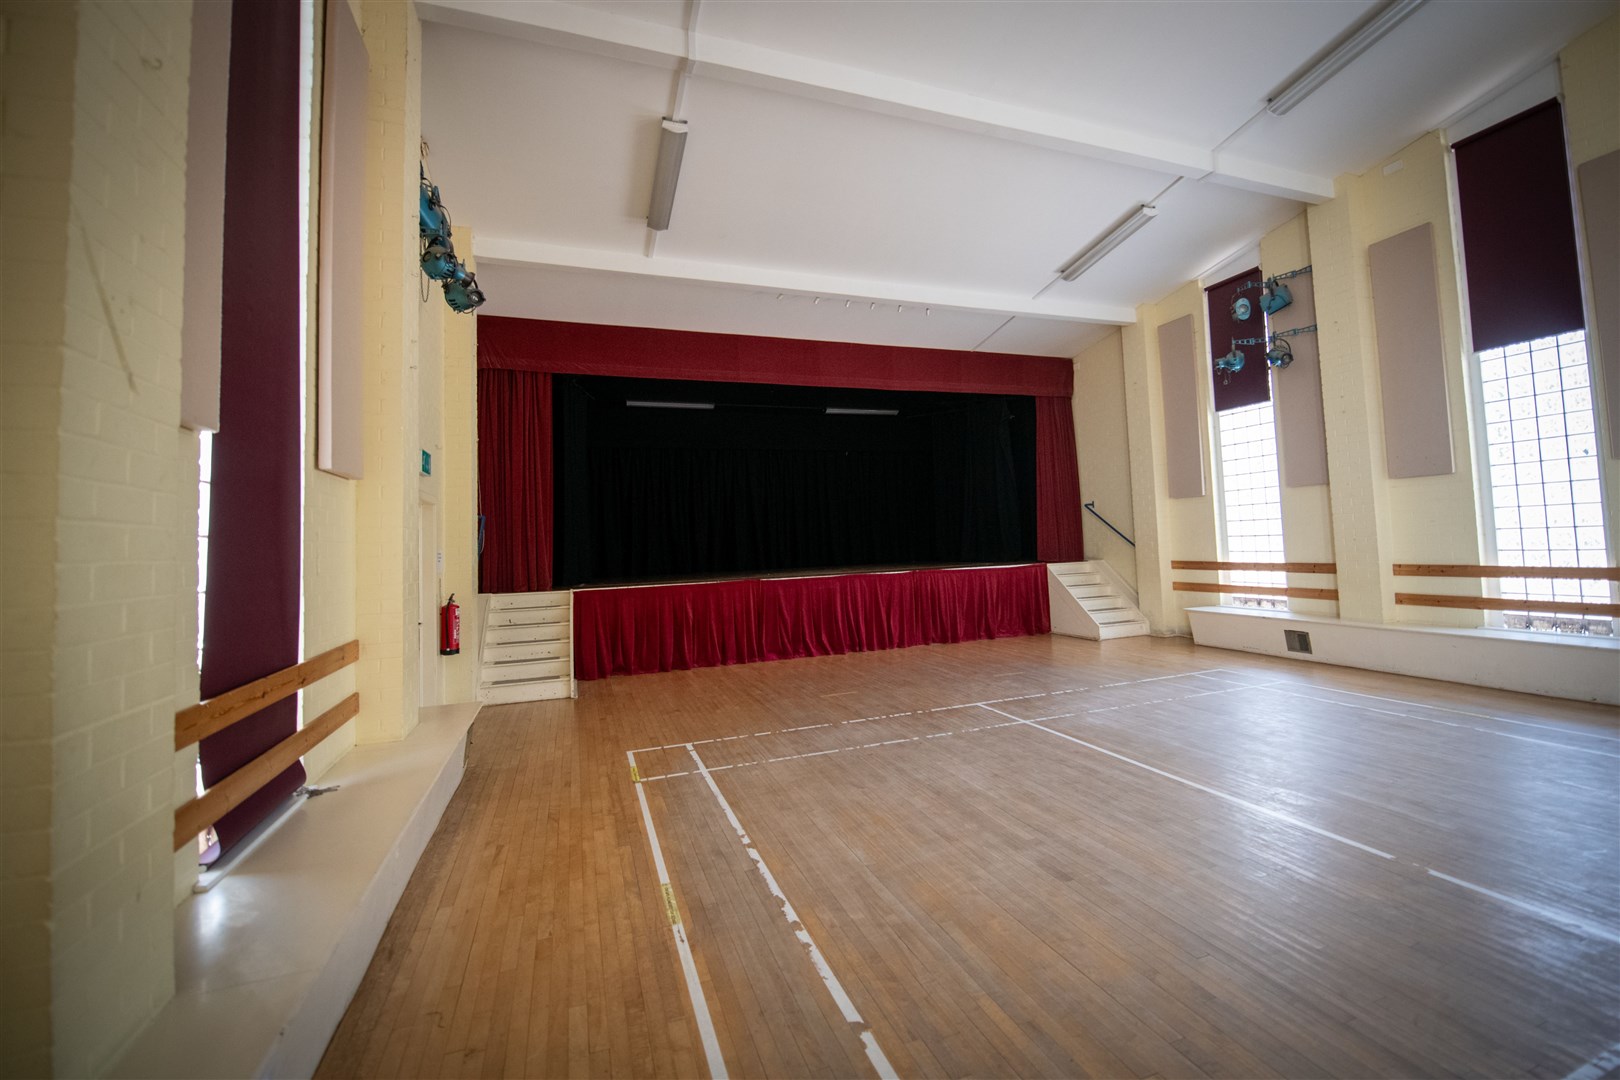 The North Kessock Village Hall has a deep stage and full theatre curtains and a seated capacity in the hall of 200. Picture: Callum Mackay